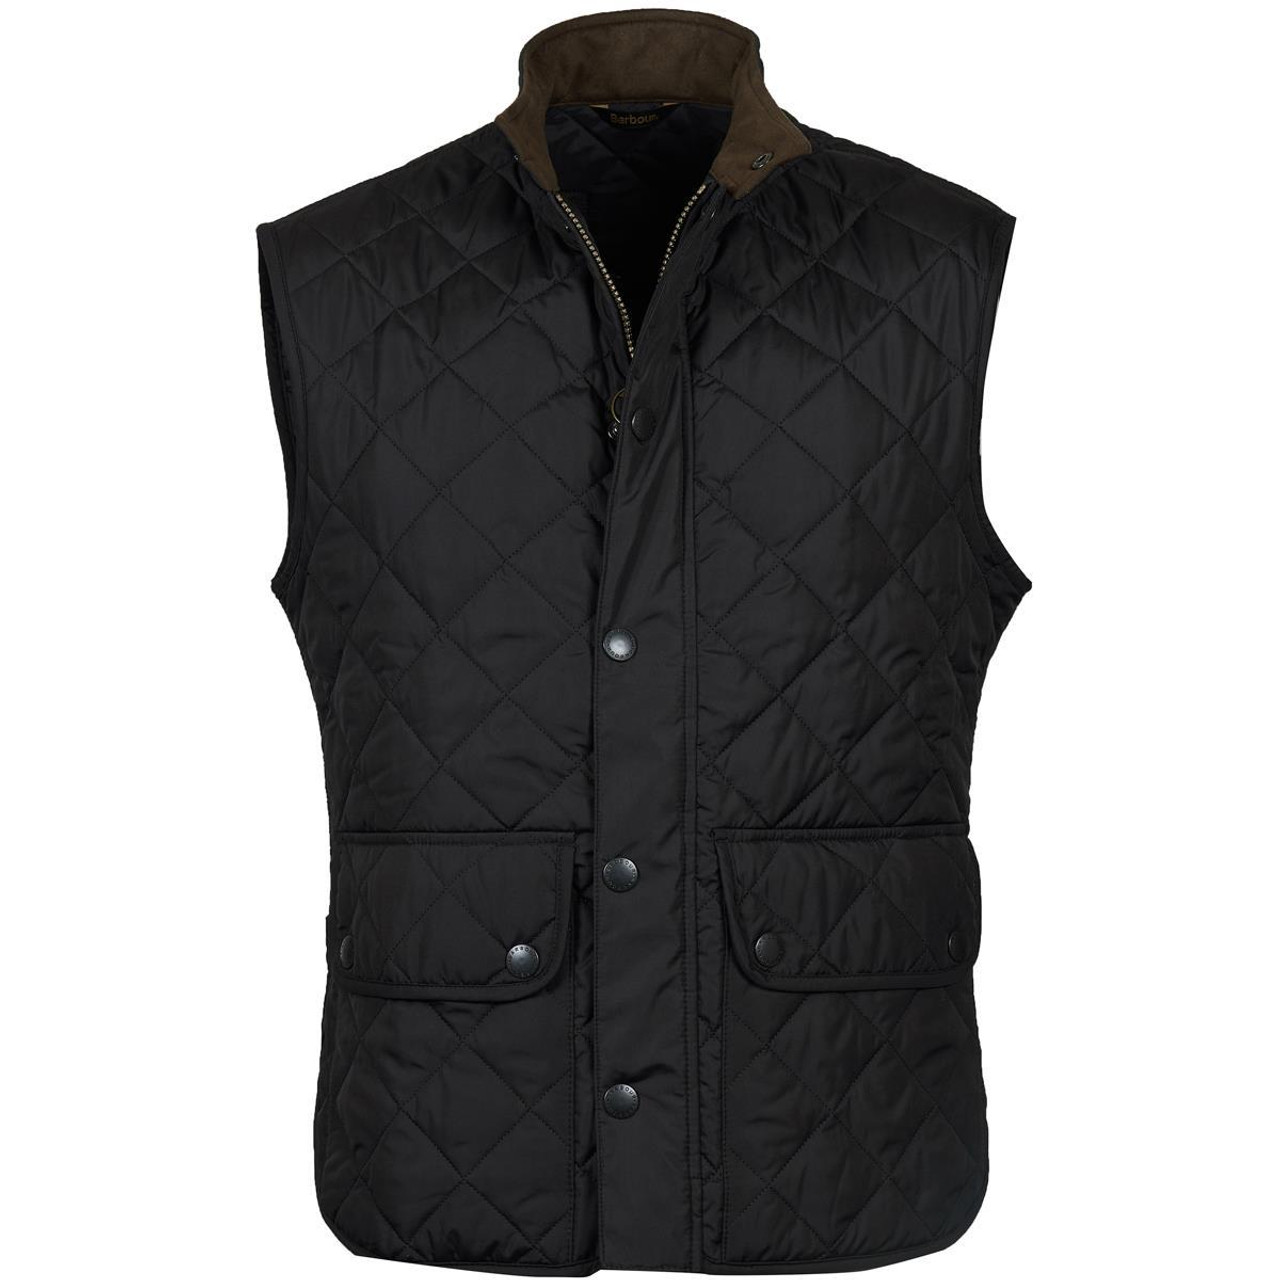 Can the Barbour Lowerdale Gilet be layered?